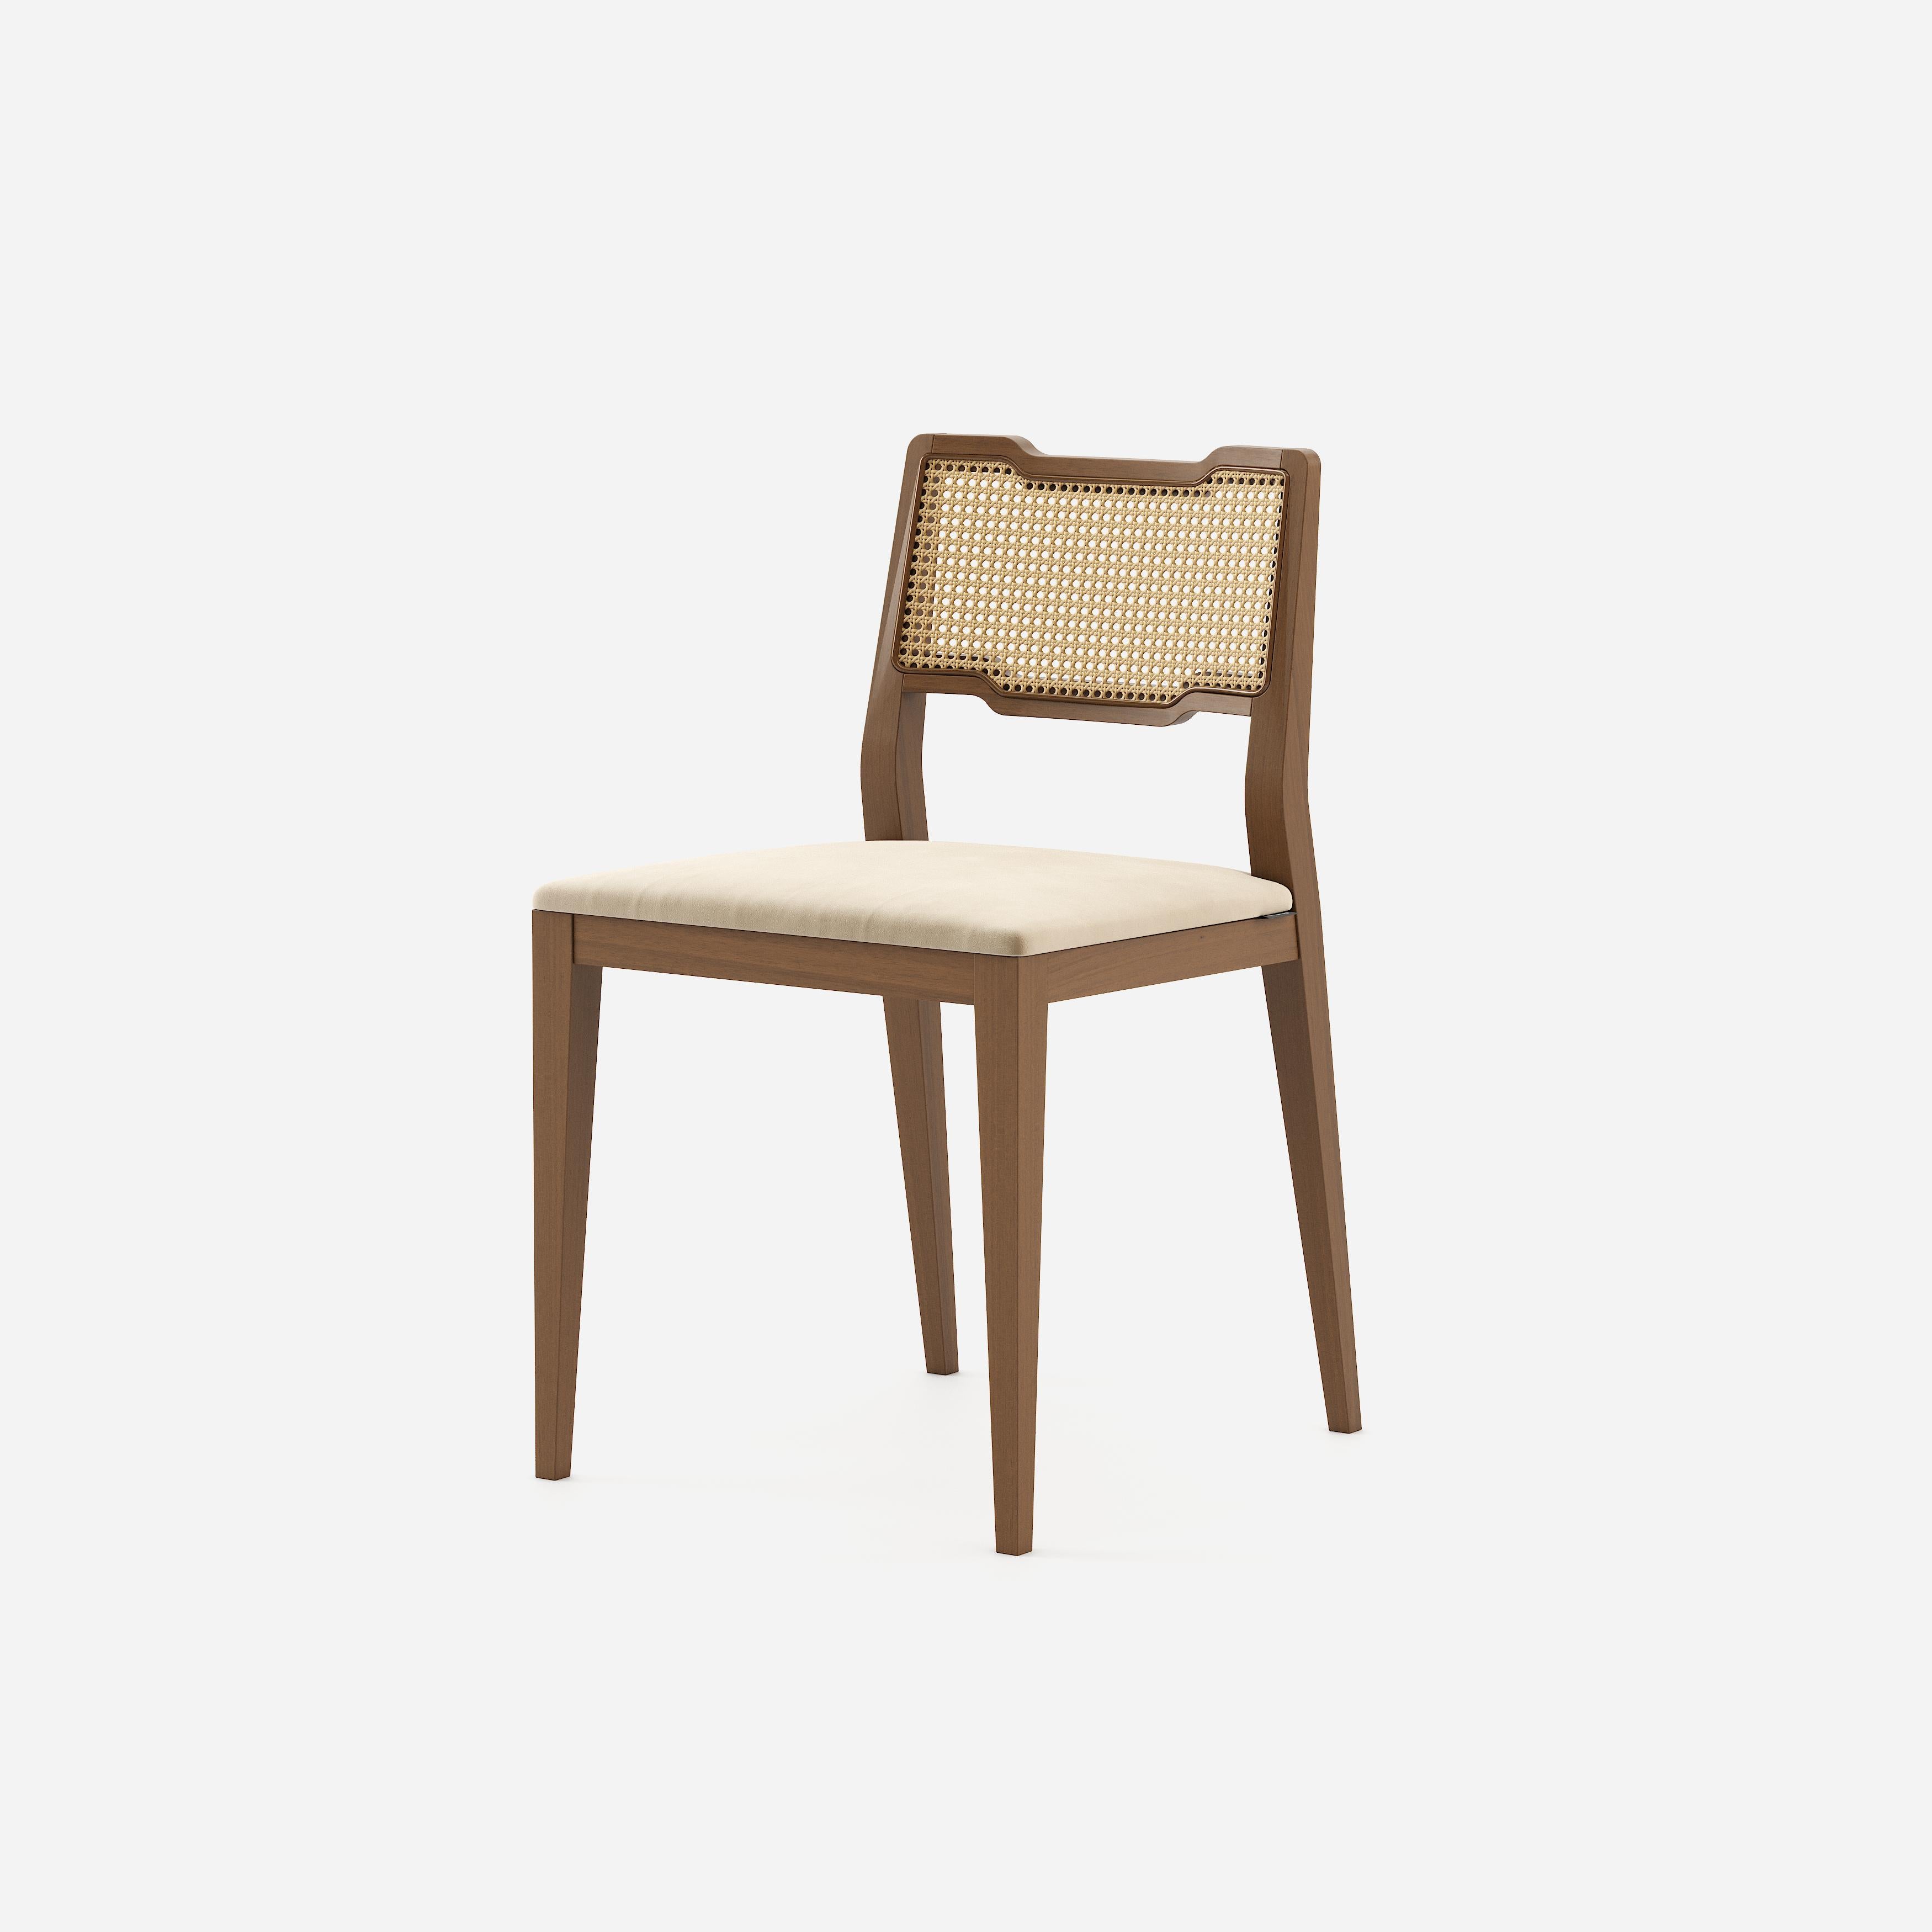 Modern Contemporary Rattan Dining Chairs in Walnut Finish, Set of 4.